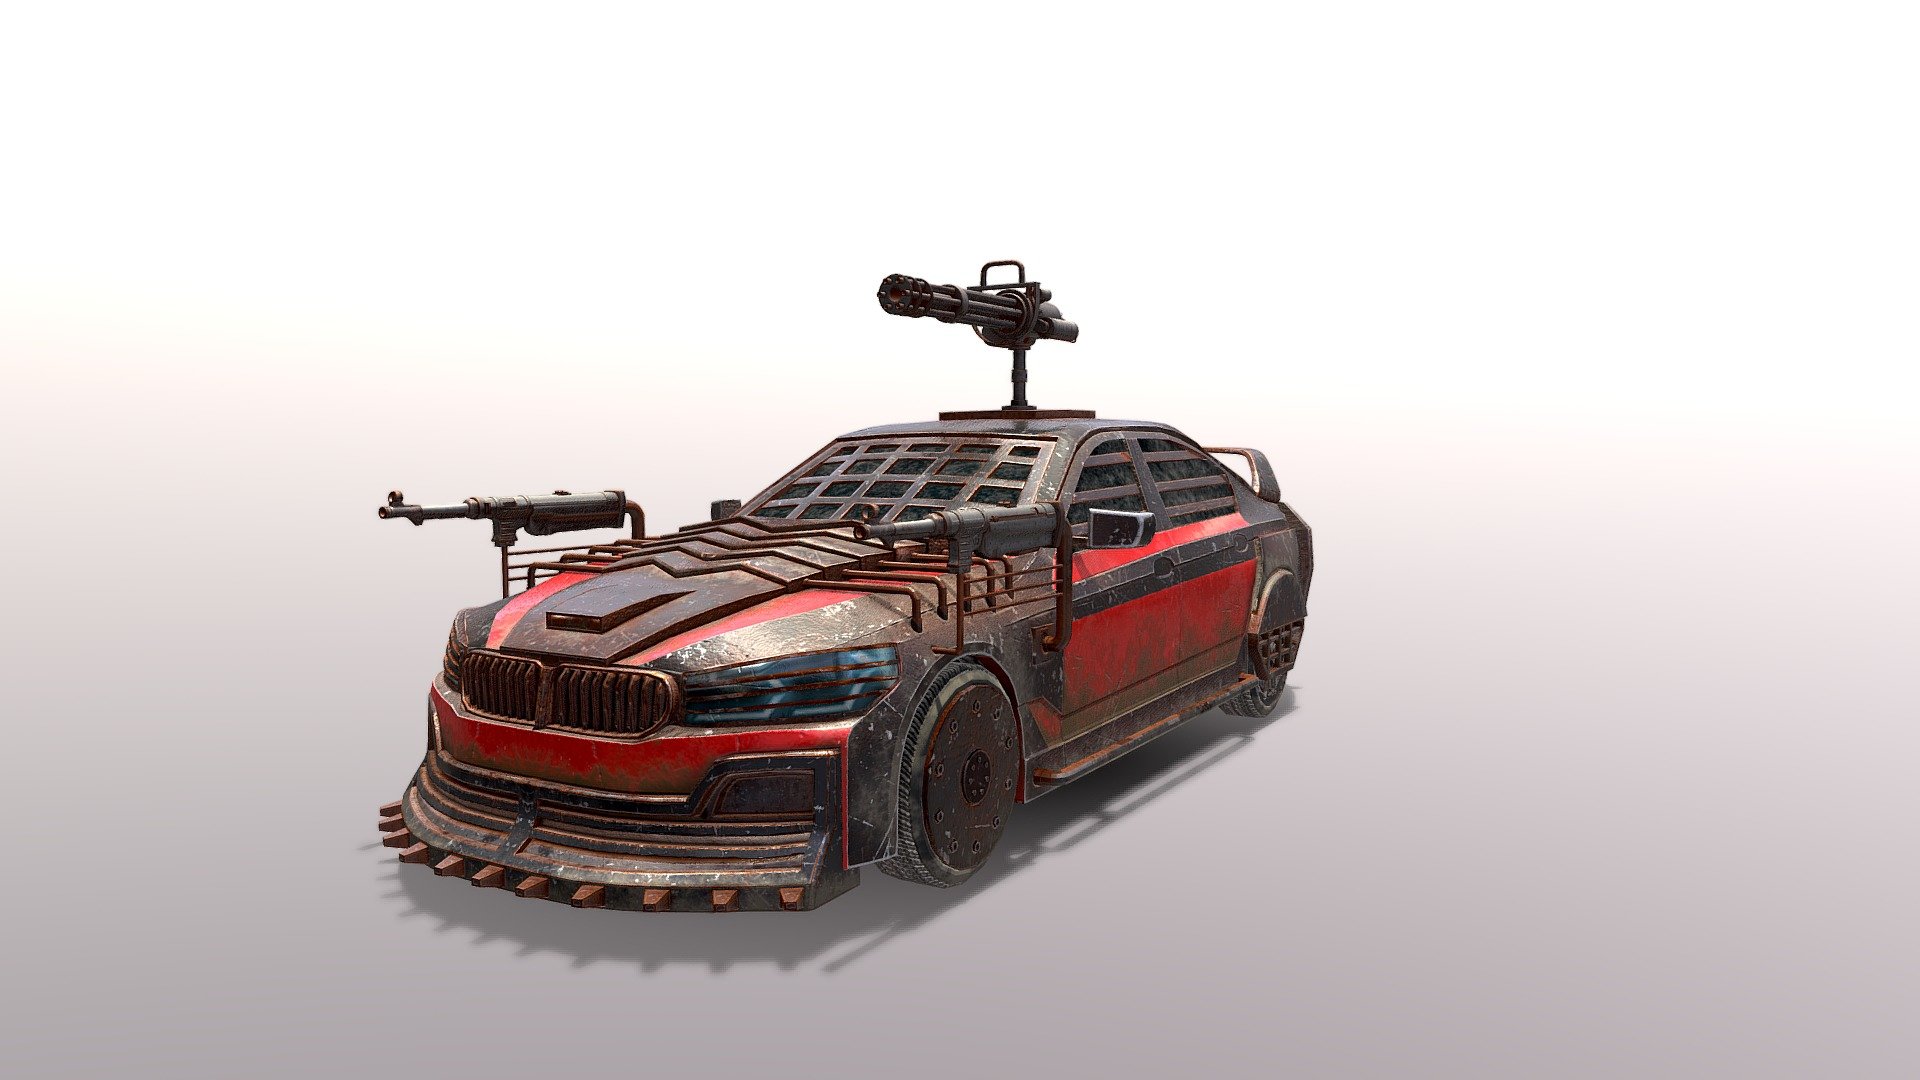 The badass of cars with the armed body that can destroy anyone in a war setting.

This asset is designed after a Badass Car almost like a leader of an armed gang who are on a mission to destroy anyone who comes in front. This model has the tiniest of detailing with three weapons attached out of which one is at the roof and two on front sides. It can be integrated in any game of war type environments as it is an armed car that can lead a troop without needing any men getting out to fight.

Technical details
•   Polycounts:  Vertices: 33.3K, Triangles: 60.8K.
•   Textures: PBR Textures
•   Files Format: Fbx.
•   Textures Format: TARGA - Armored Car - 3D model by Charles Smith (Blitz Mobile Apps) (@BlitzMobileApp) 3d model